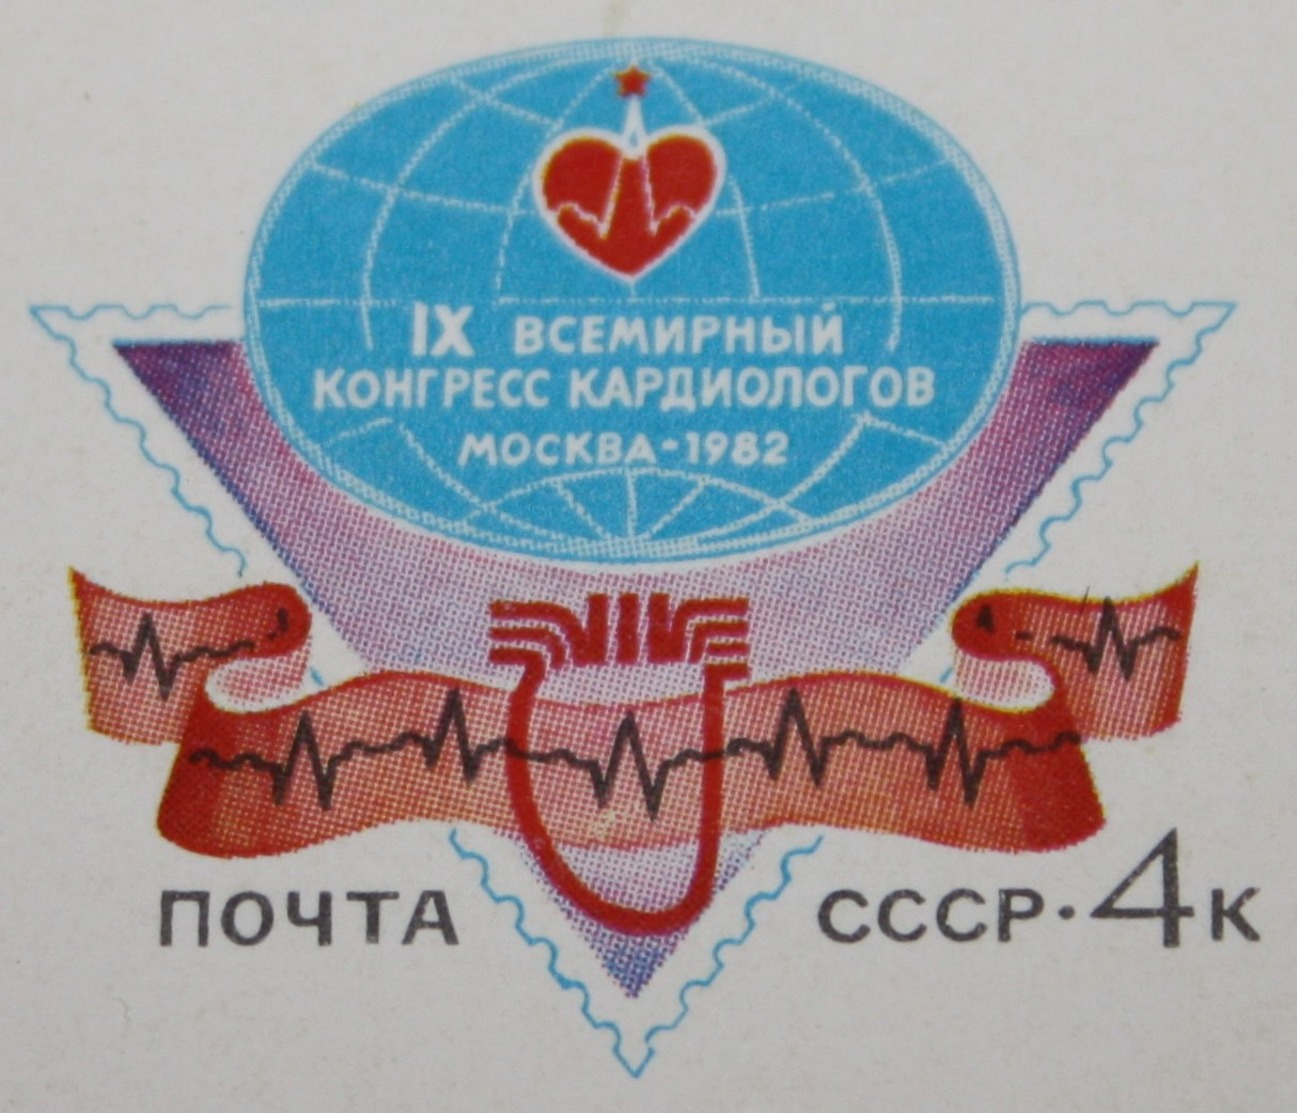 Open Letter Of The USSR., Series: "9th World Congress Of Cardiology, Moscow 1982" - Ukraine